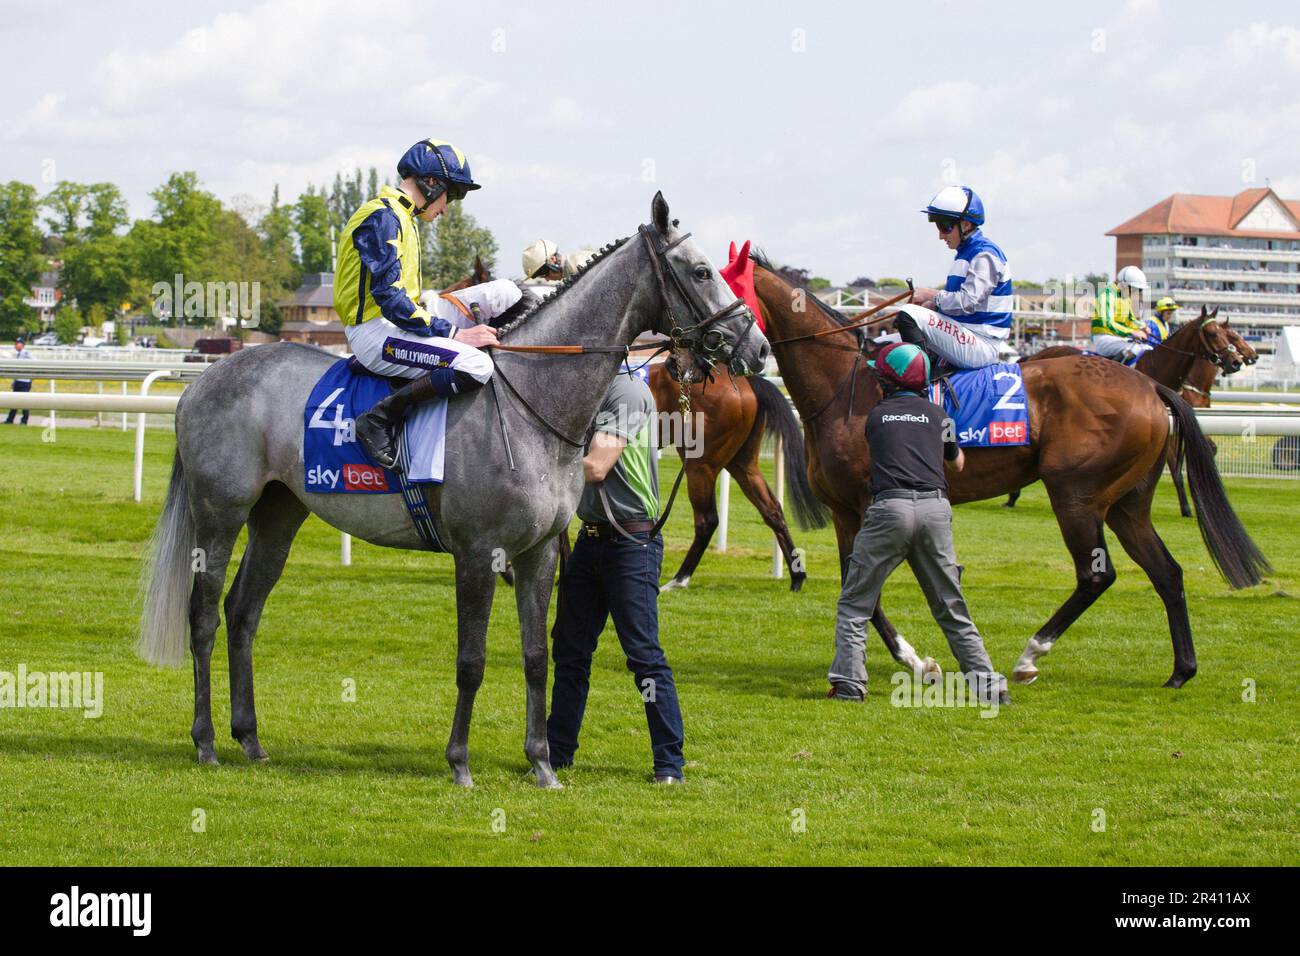 Left to right: Jockeys Daniel Muscutt on Surrey Mist and Tom Marquand on Tasman Bay at York Races. Stock Photo